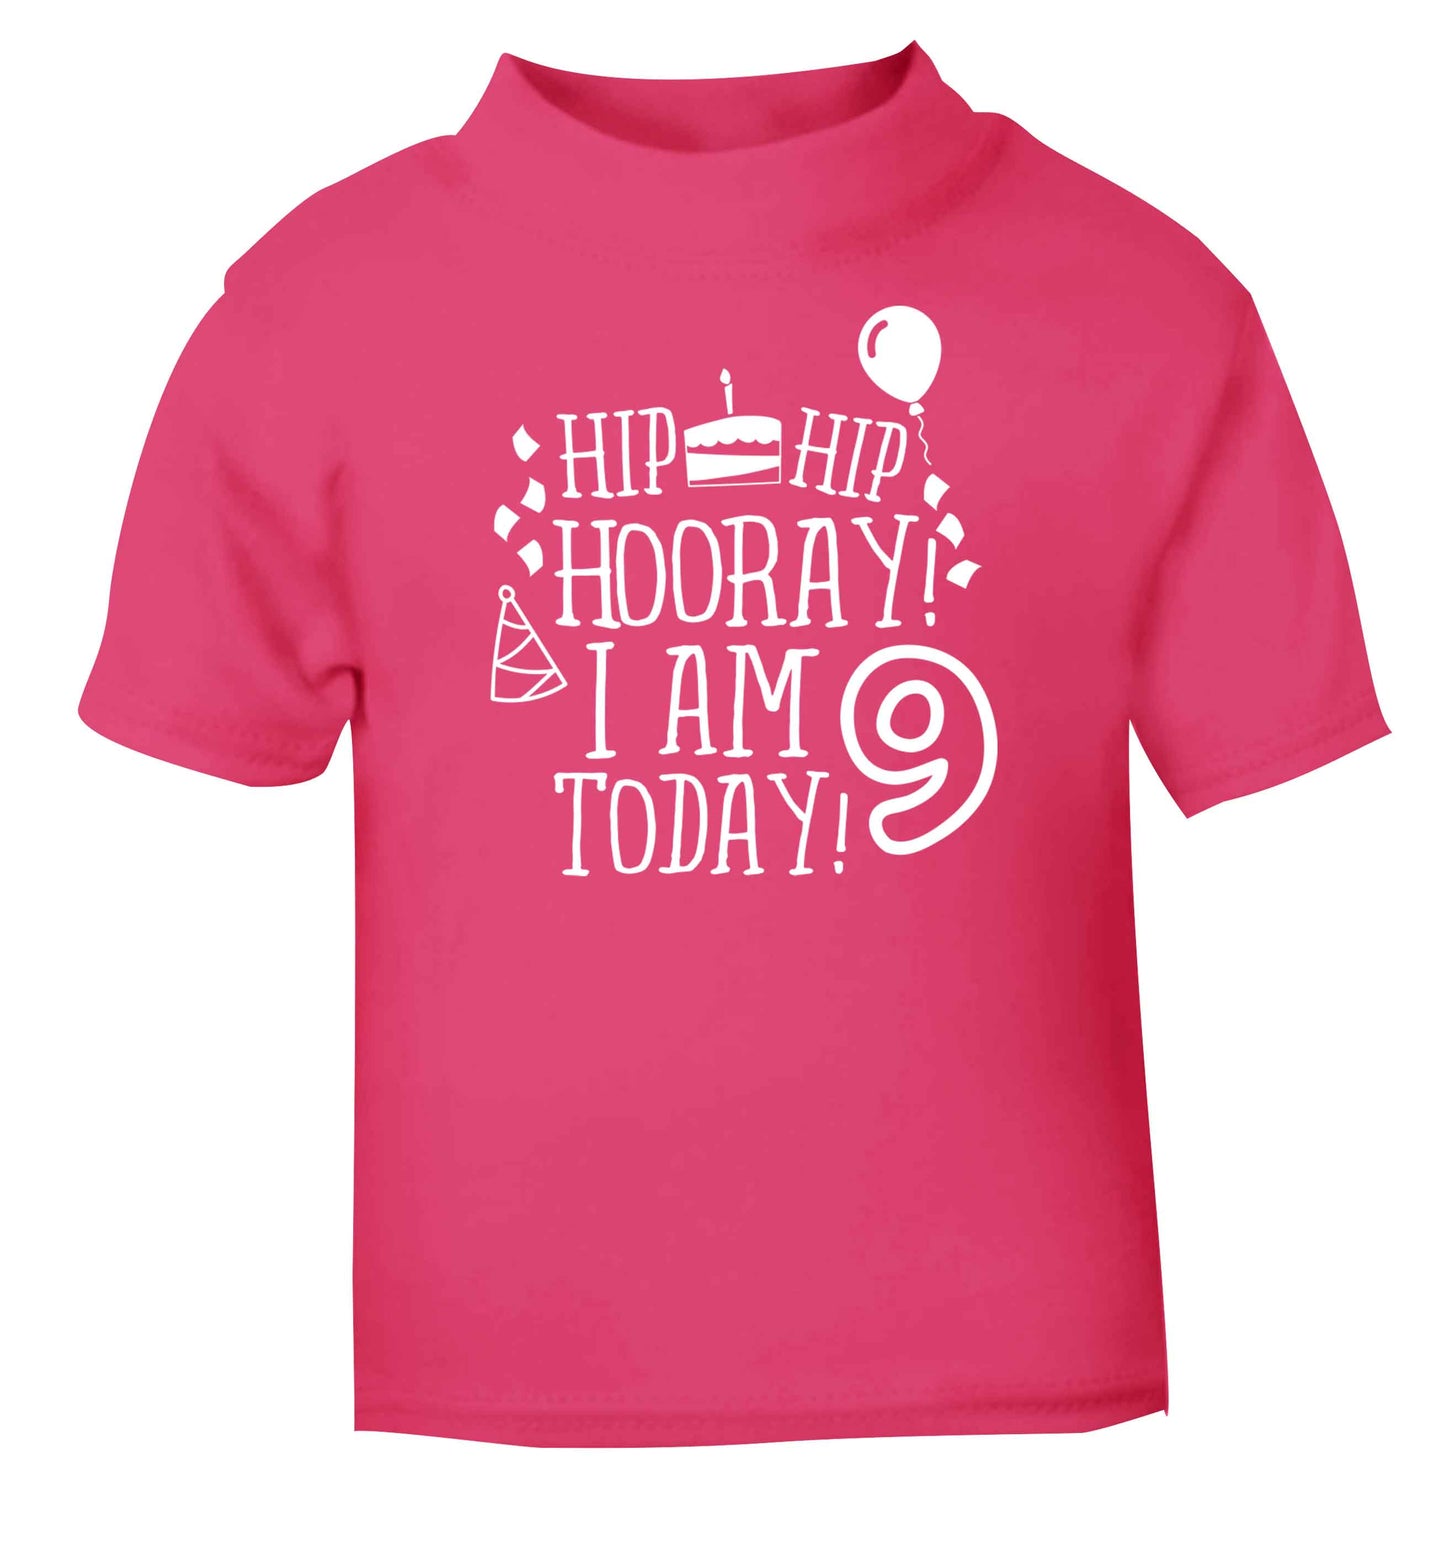 Hip hip hooray I am 9 today! pink baby toddler Tshirt 2 Years